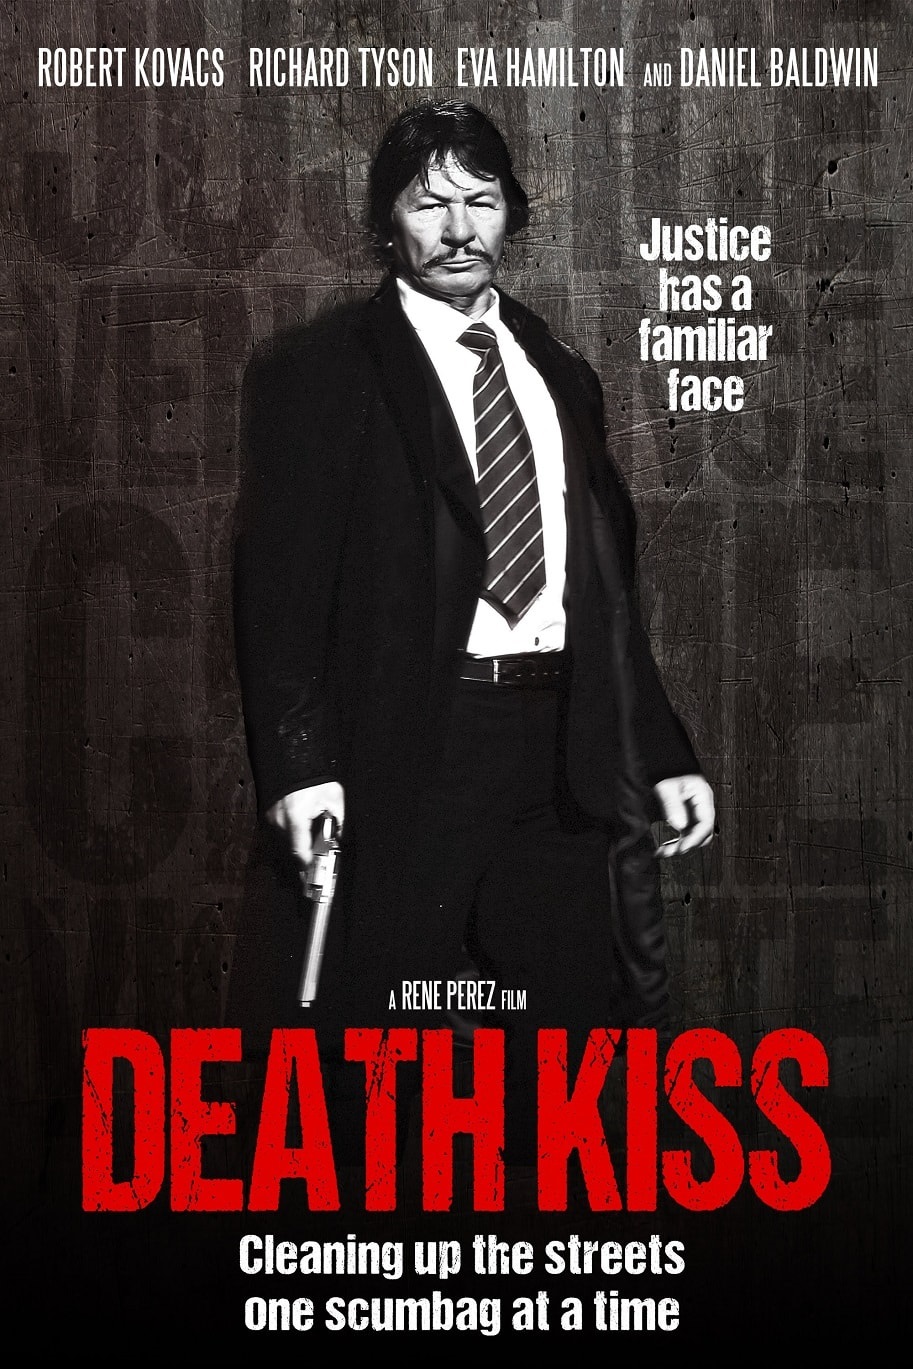 New Trailer Death Kiss starring Bronson look-alike hits VOD next month